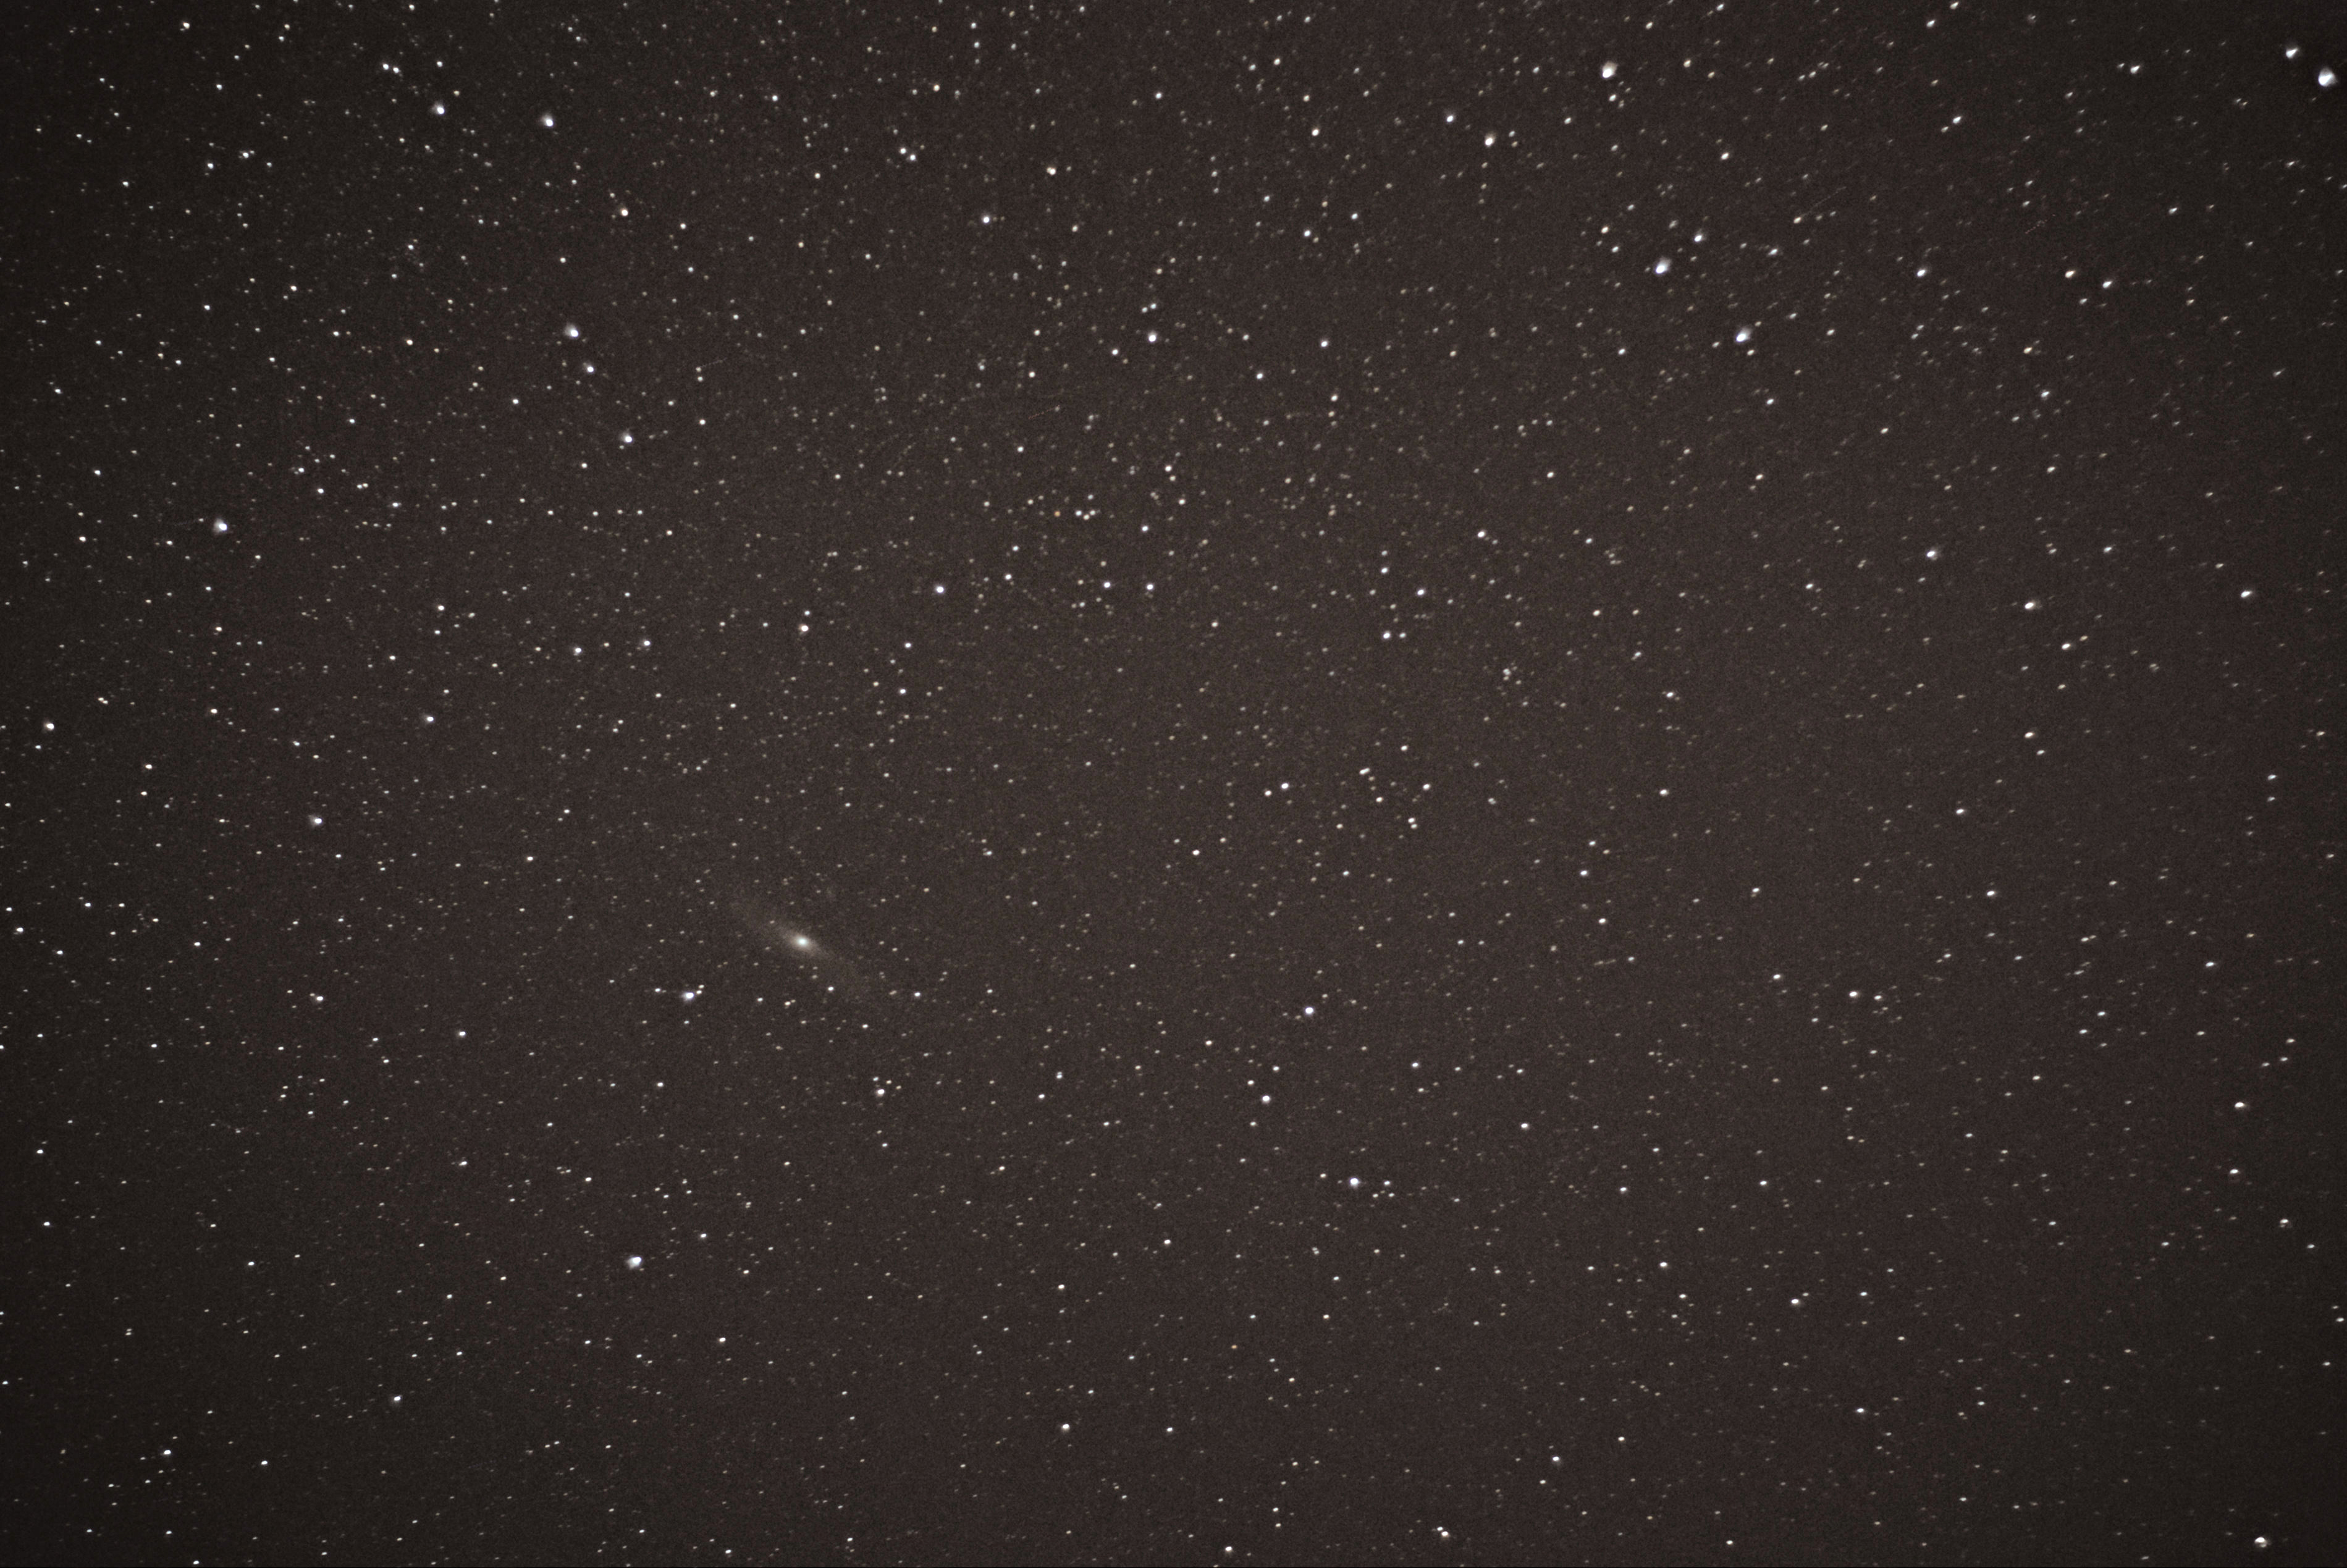 Andromeda Galaxy wide view